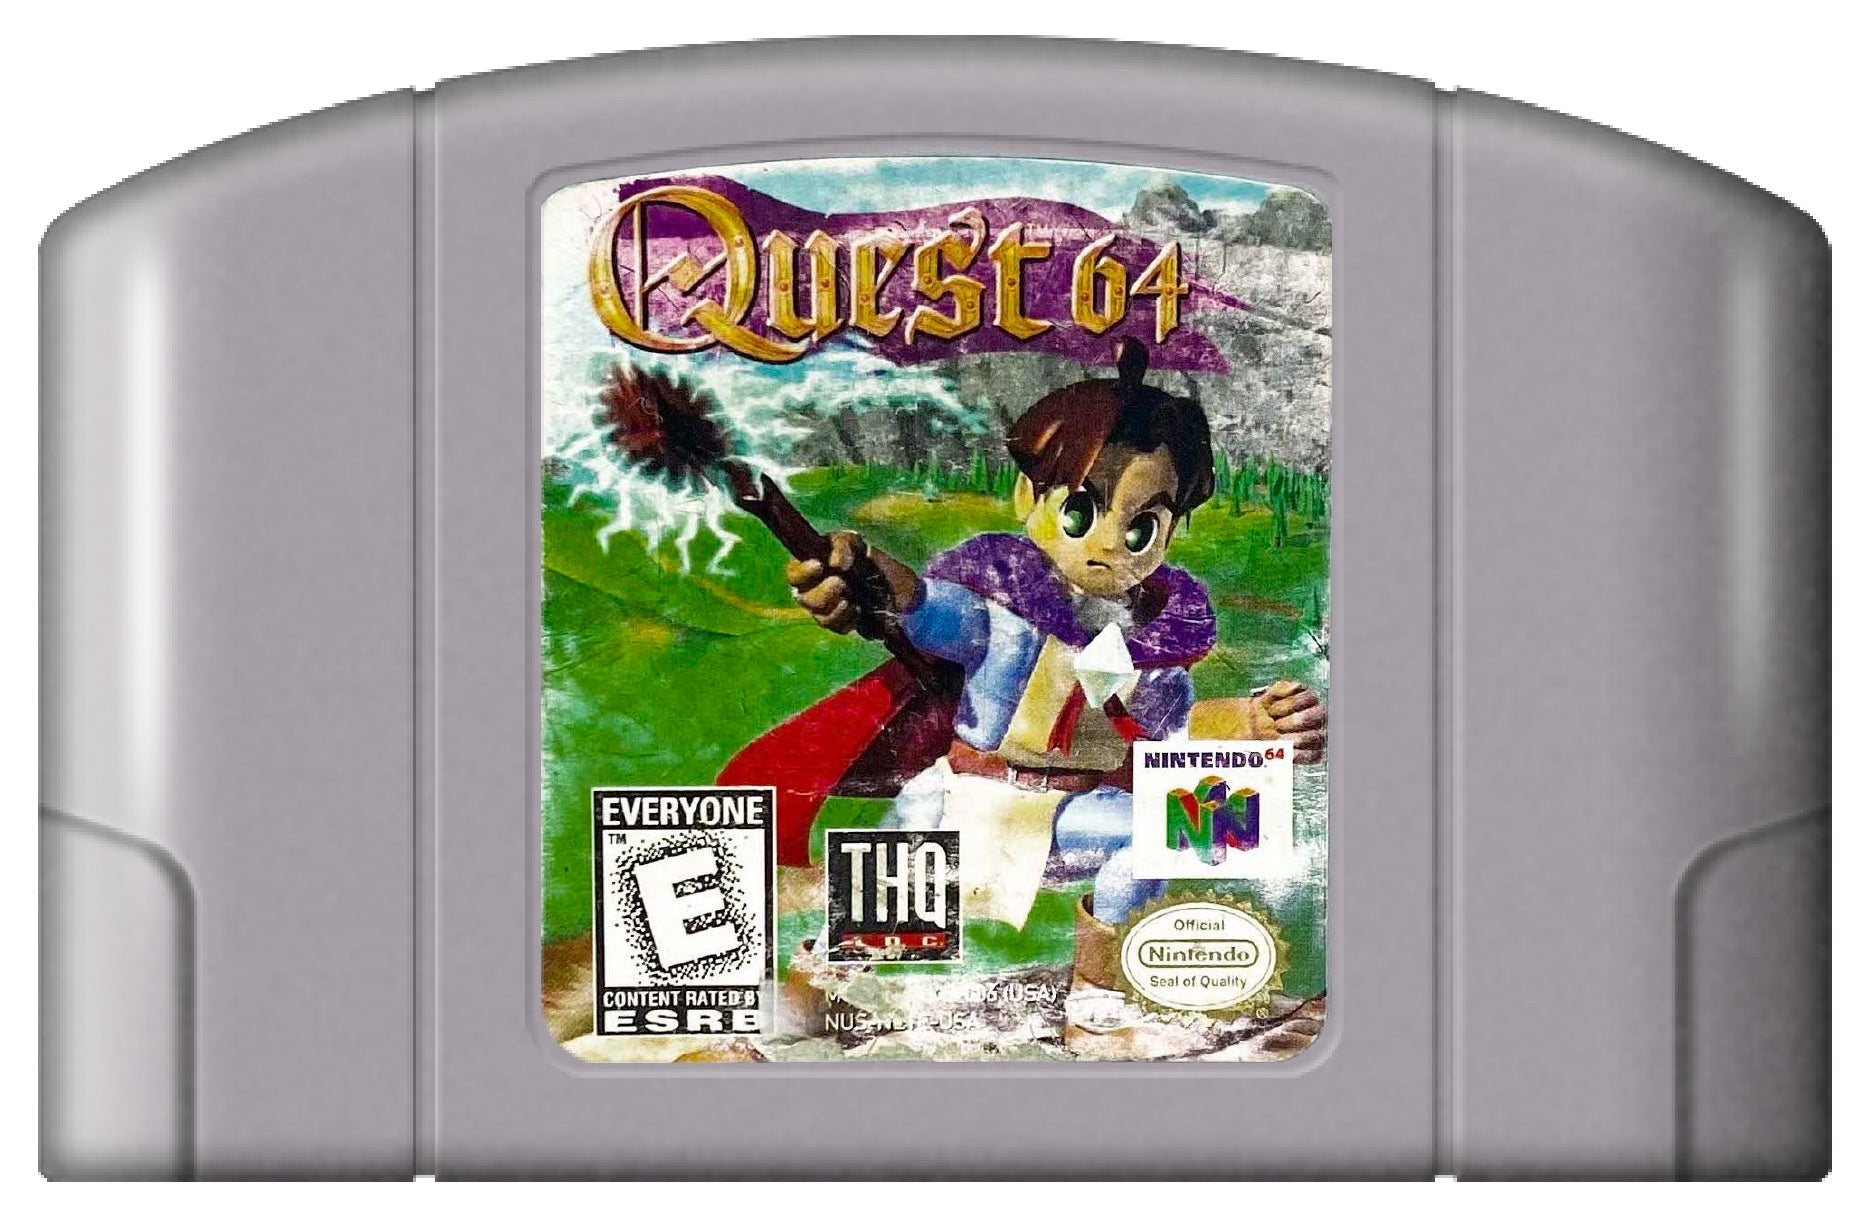 Quest 64 Cover Art and Product Photo